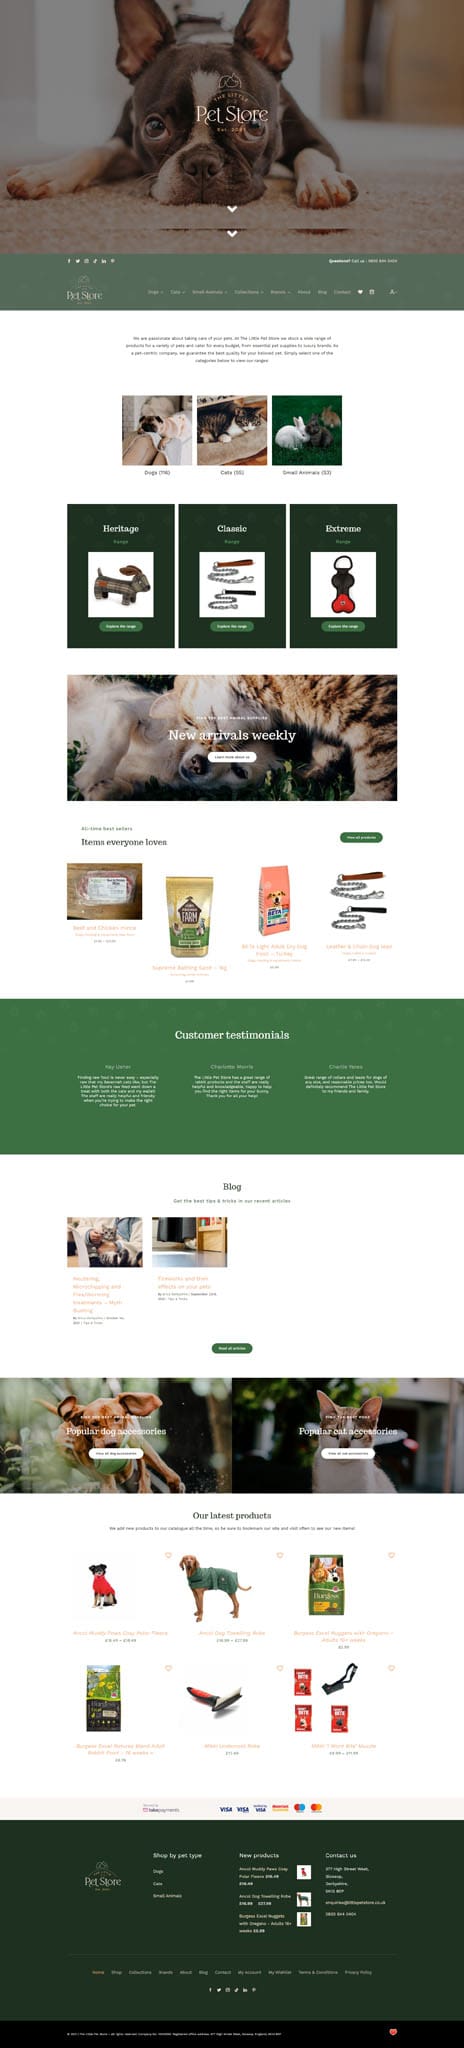 The Little Pet Store - Homepage